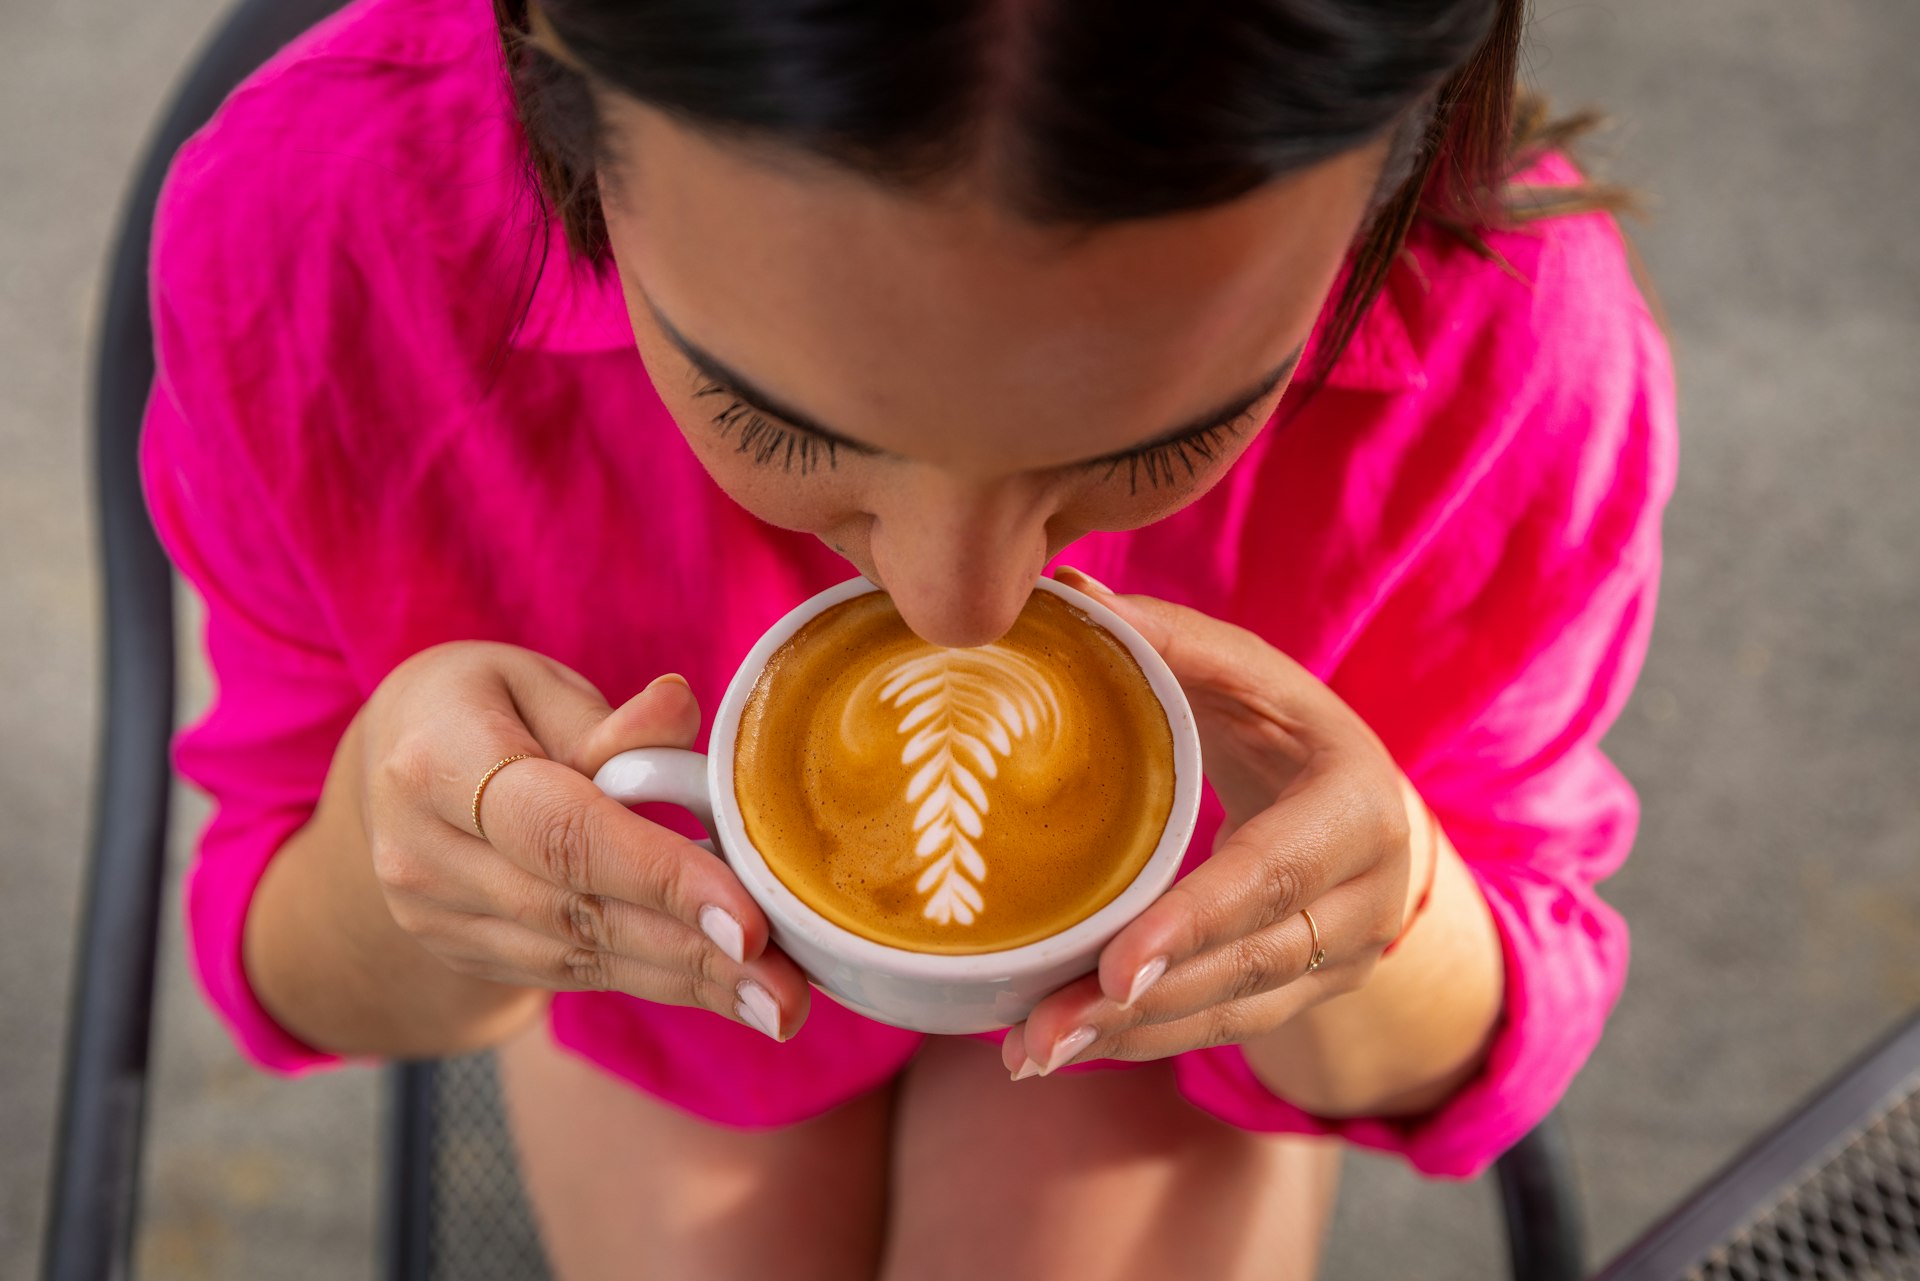 A young woman in a bright pink shirt, looking down at the cup as she drinks a coffee, Hacienda Munoz, Puerto Rico